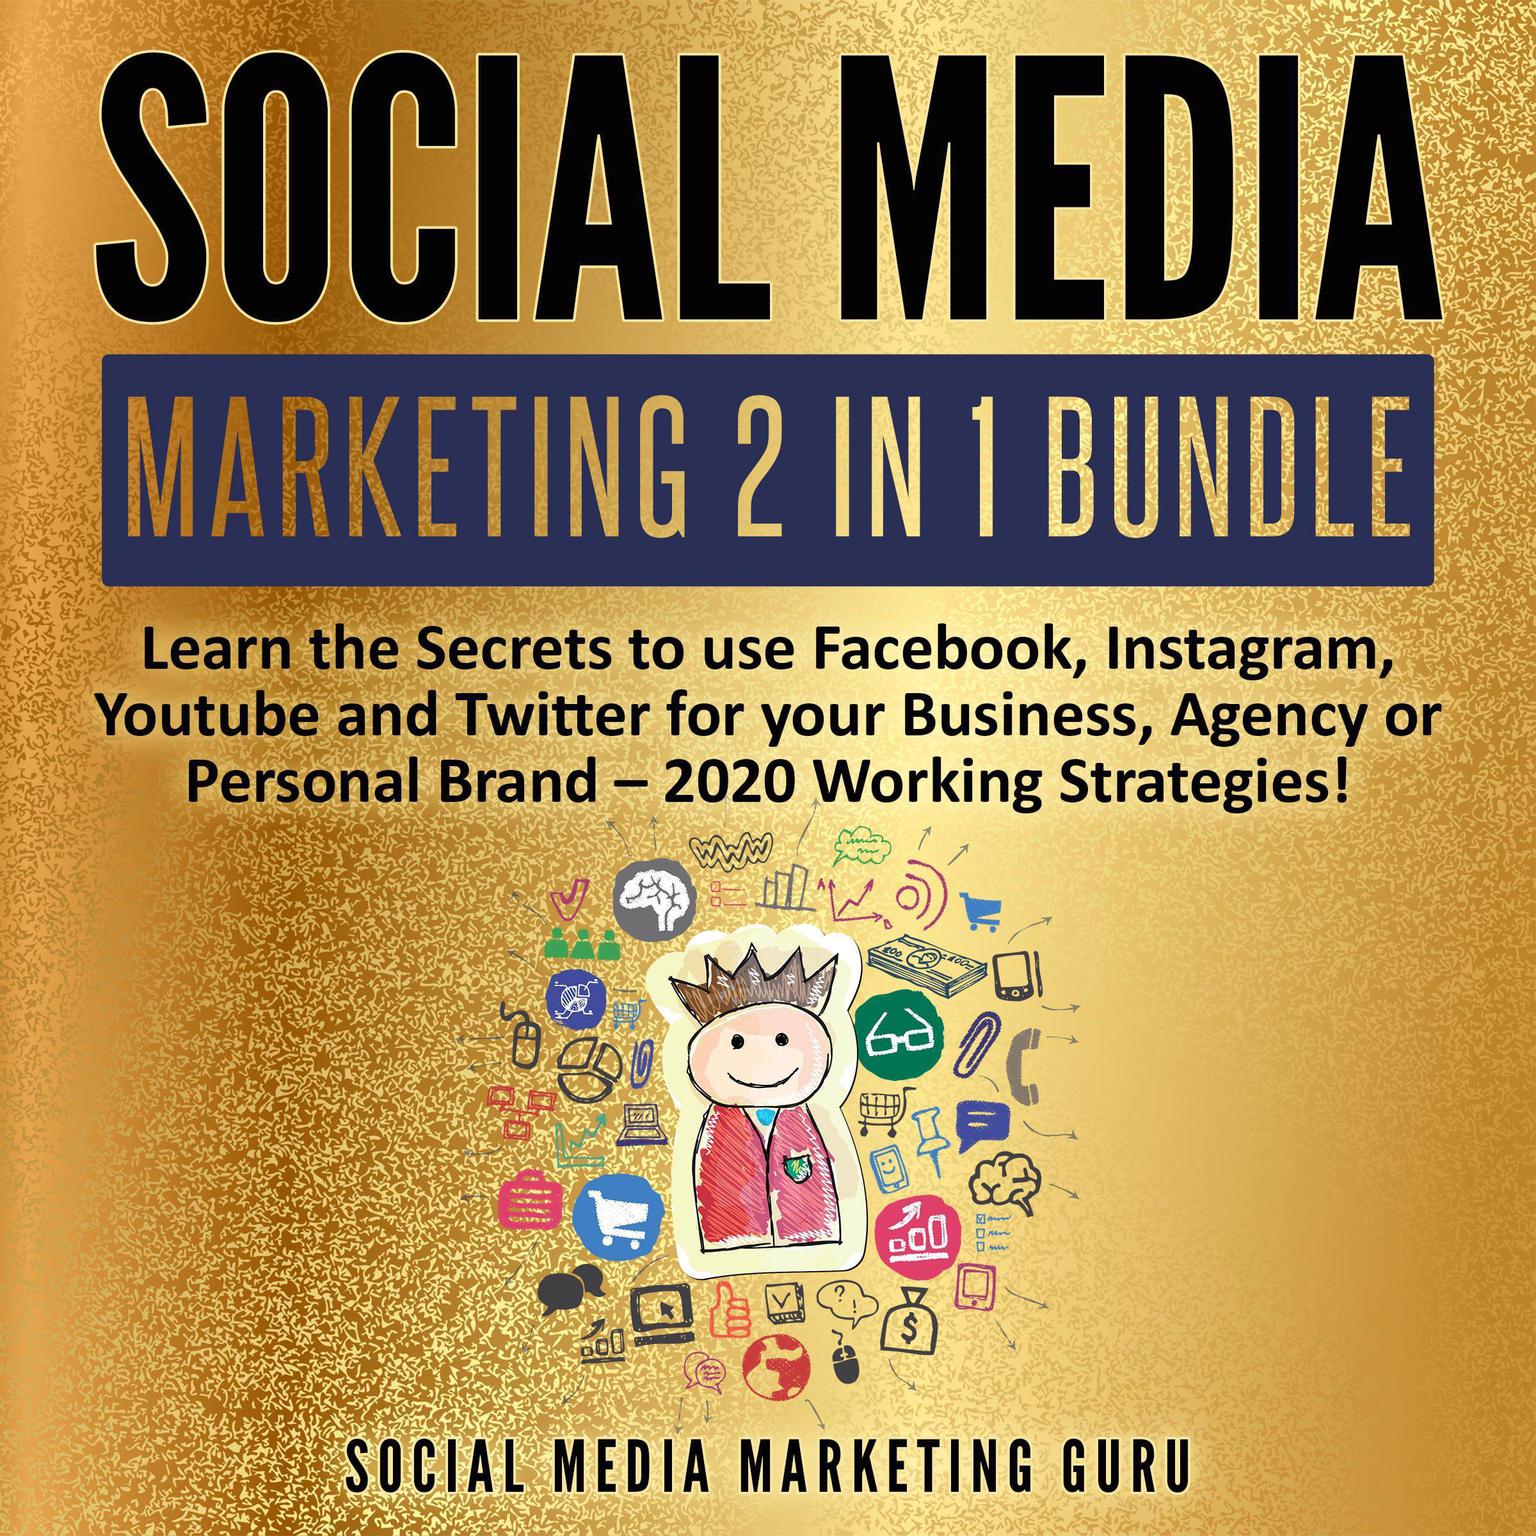 Social Media Marketing 2 in 1 Bundle (Abridged): Learn the Secrets to use Facebook, Instagram, YouTube, and Twitter for your Business, Agency, or Personal Brand—2020 Working Strategies! Audiobook, by Social Media Marketing Guru